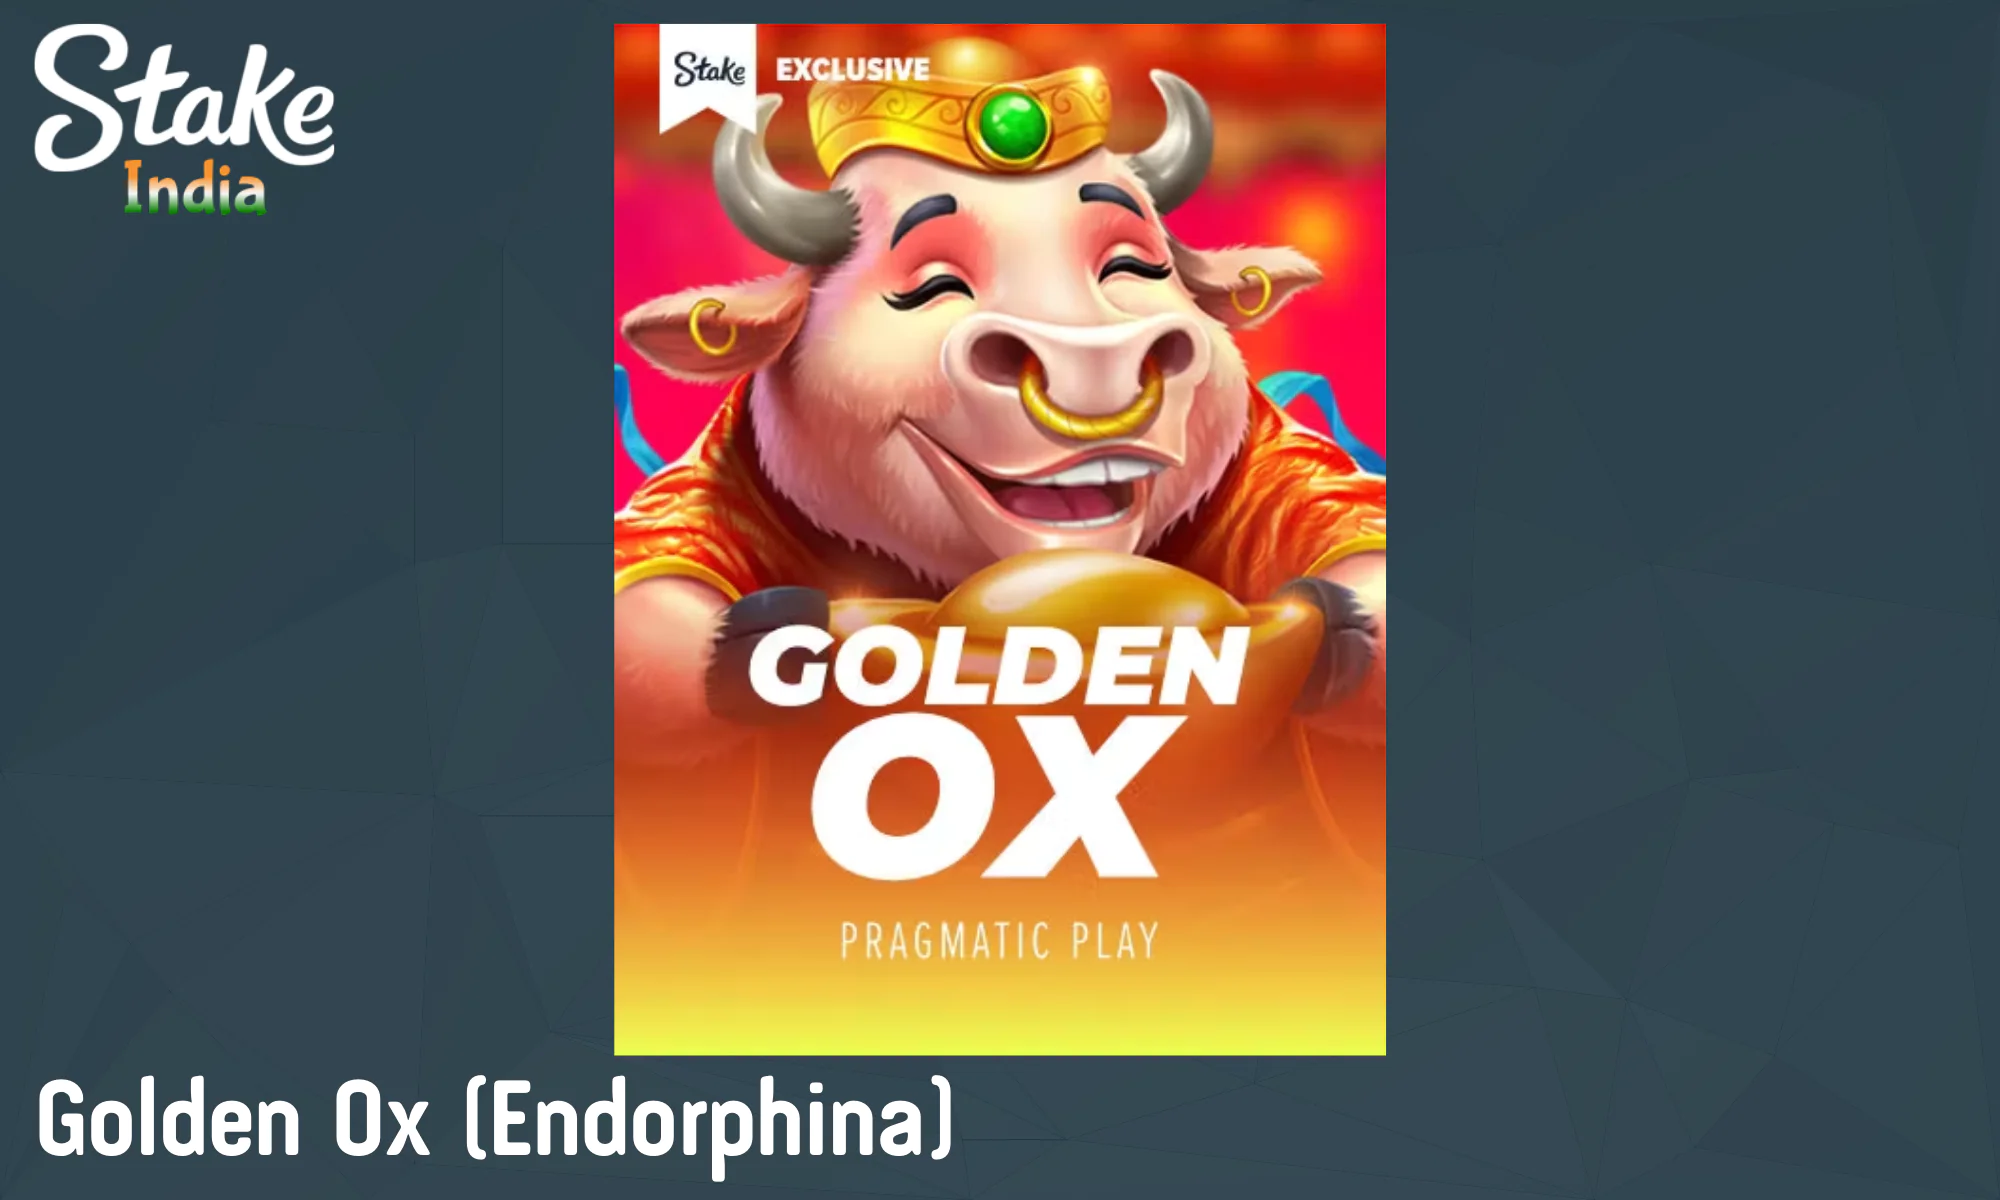 To win the Golden Ox slot, you need to collect 5 winning symbols on 5 reels